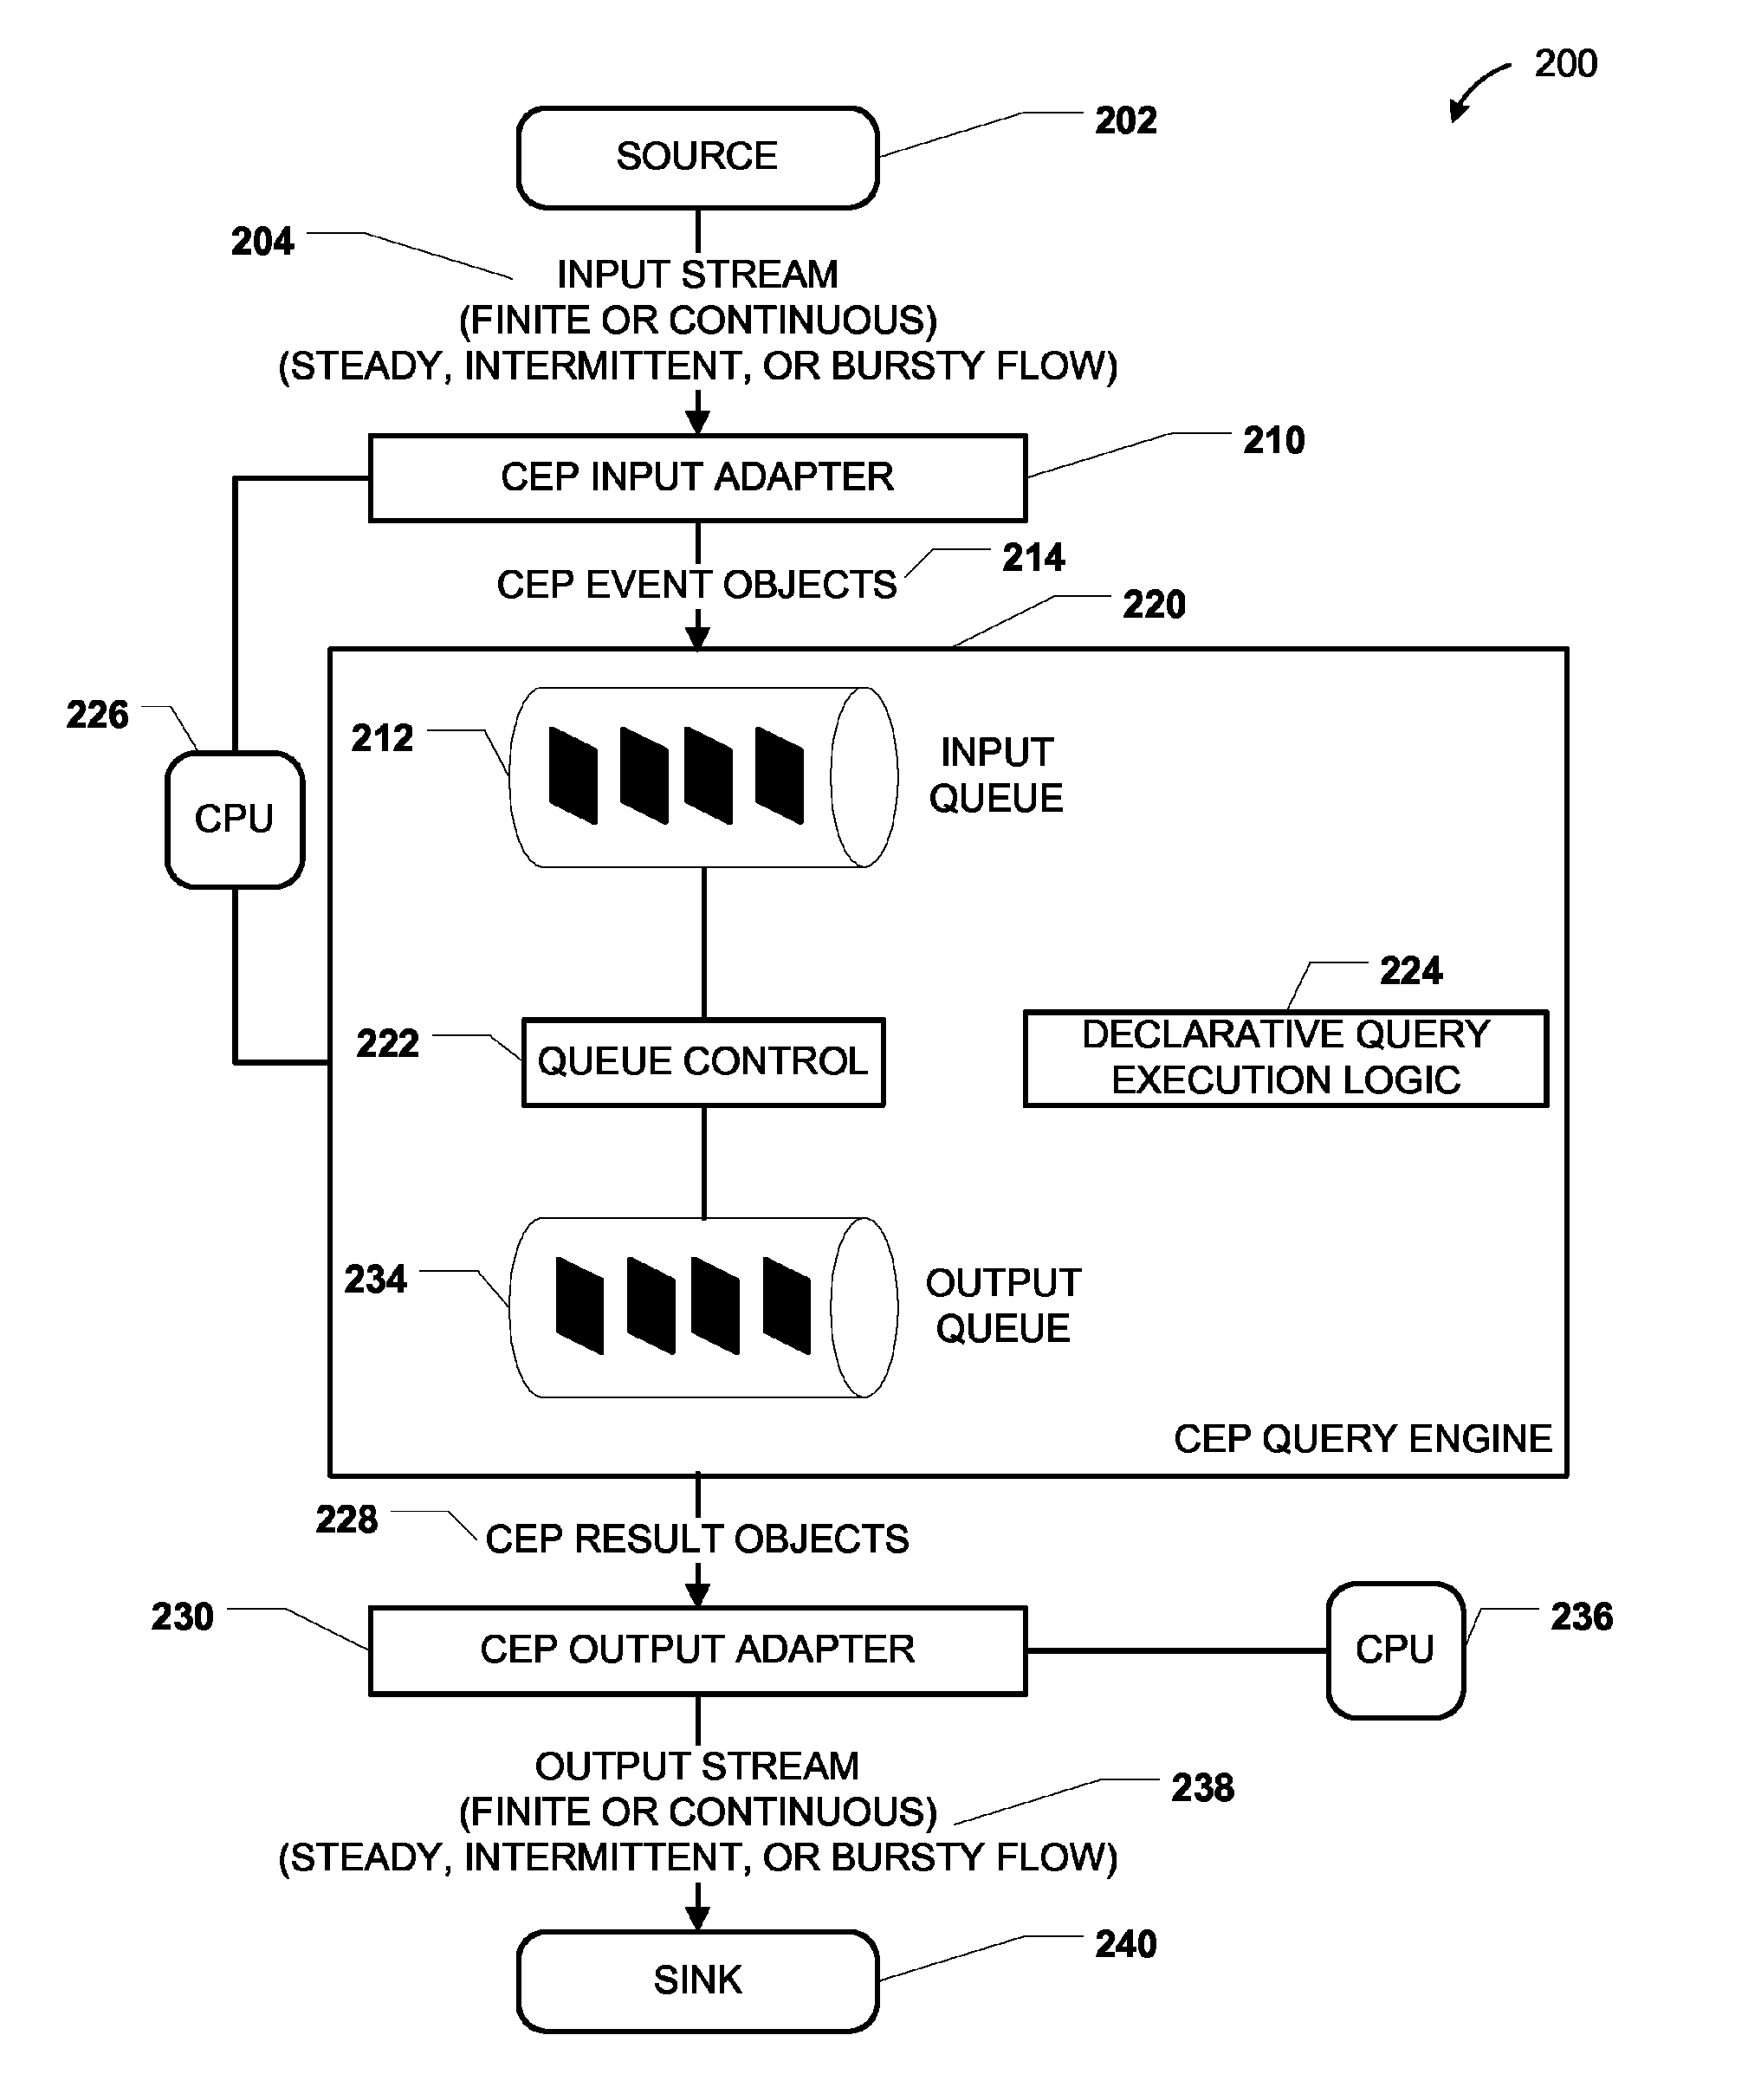 Complex event processing (CEP) adapters for CEP systems for receiving objects from a source and outputting objects to a sink